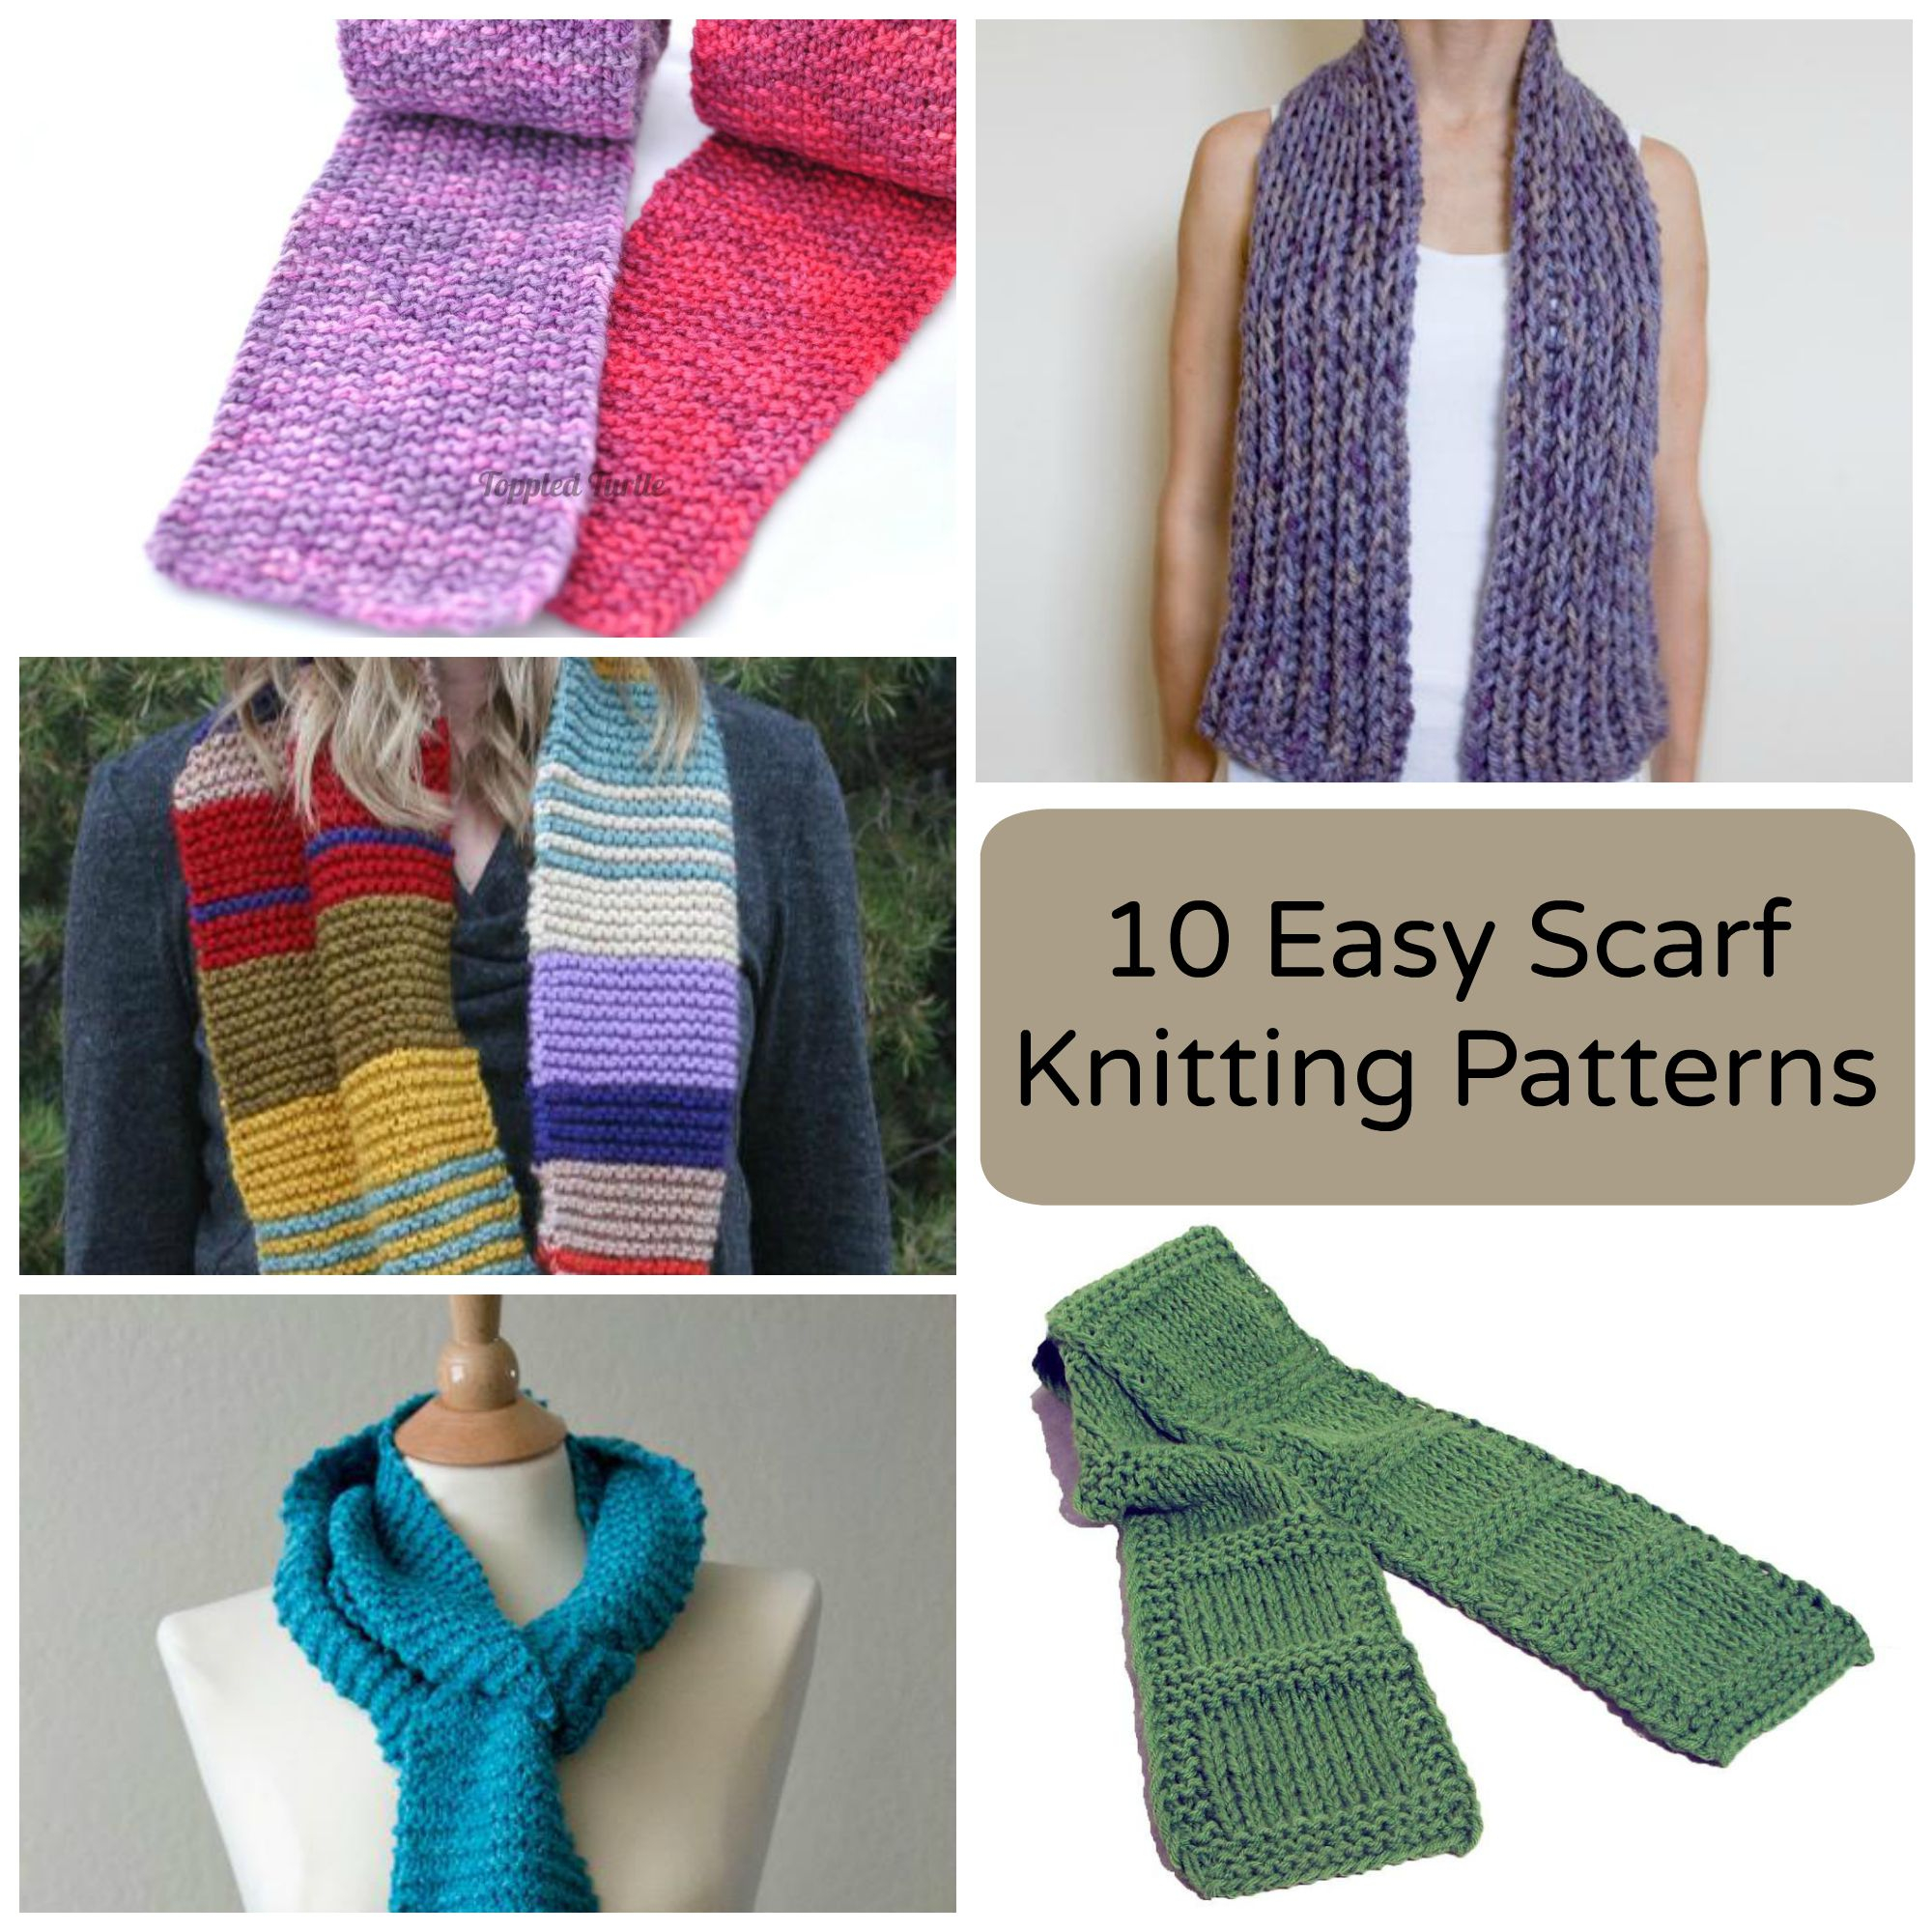 Knitting Pattern For Scarfs Beginner Knitted Scarf Patterns To Try Out Crochet And Knitting